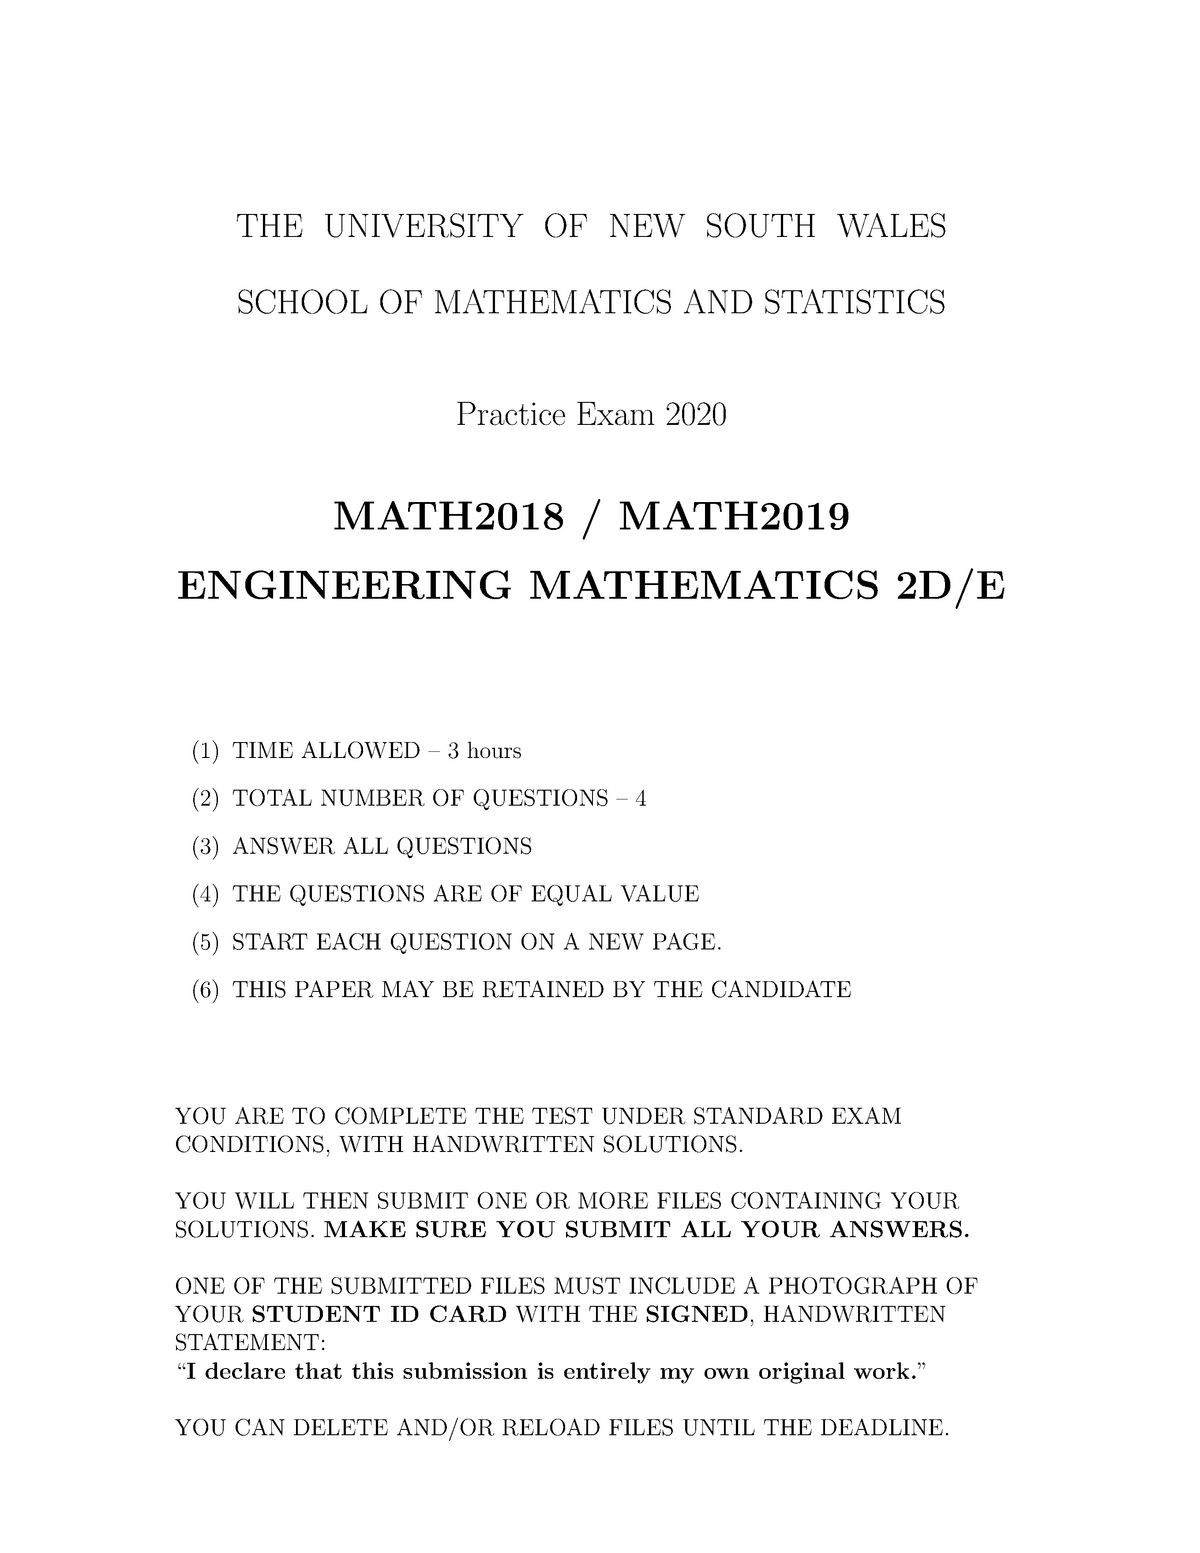 sample-practice-exam-the-university-of-new-south-wales-school-of